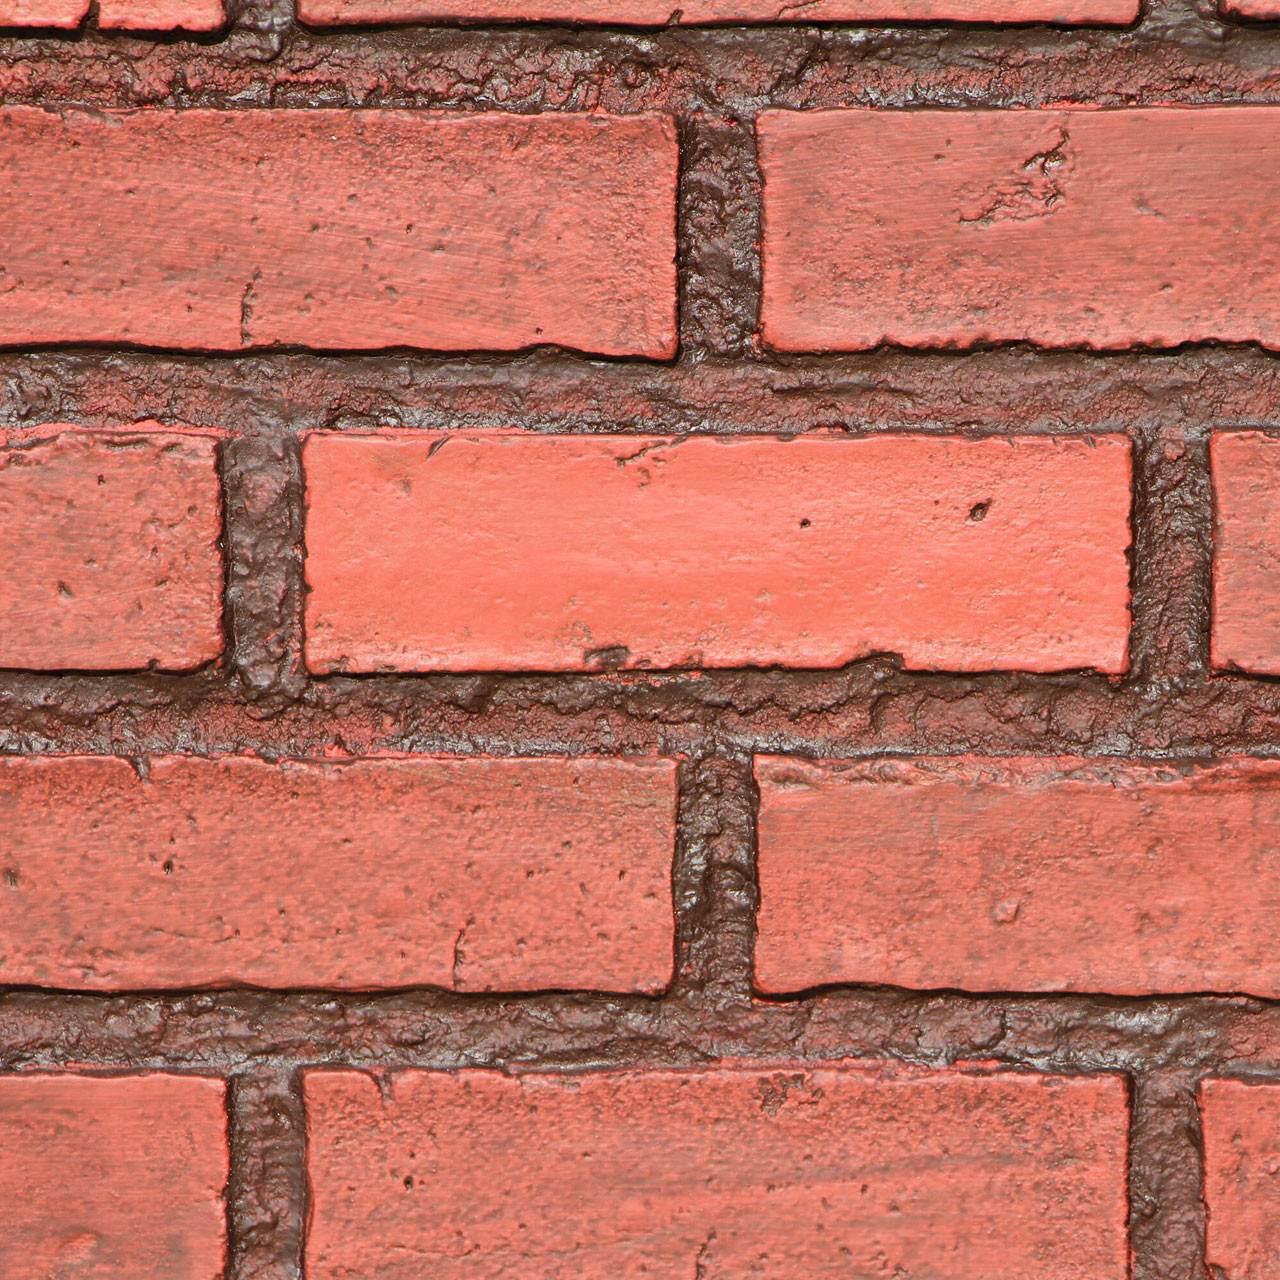 Brick Clip® For Brick Walls - Supports 25 Lbs - Picture Hang Solutions